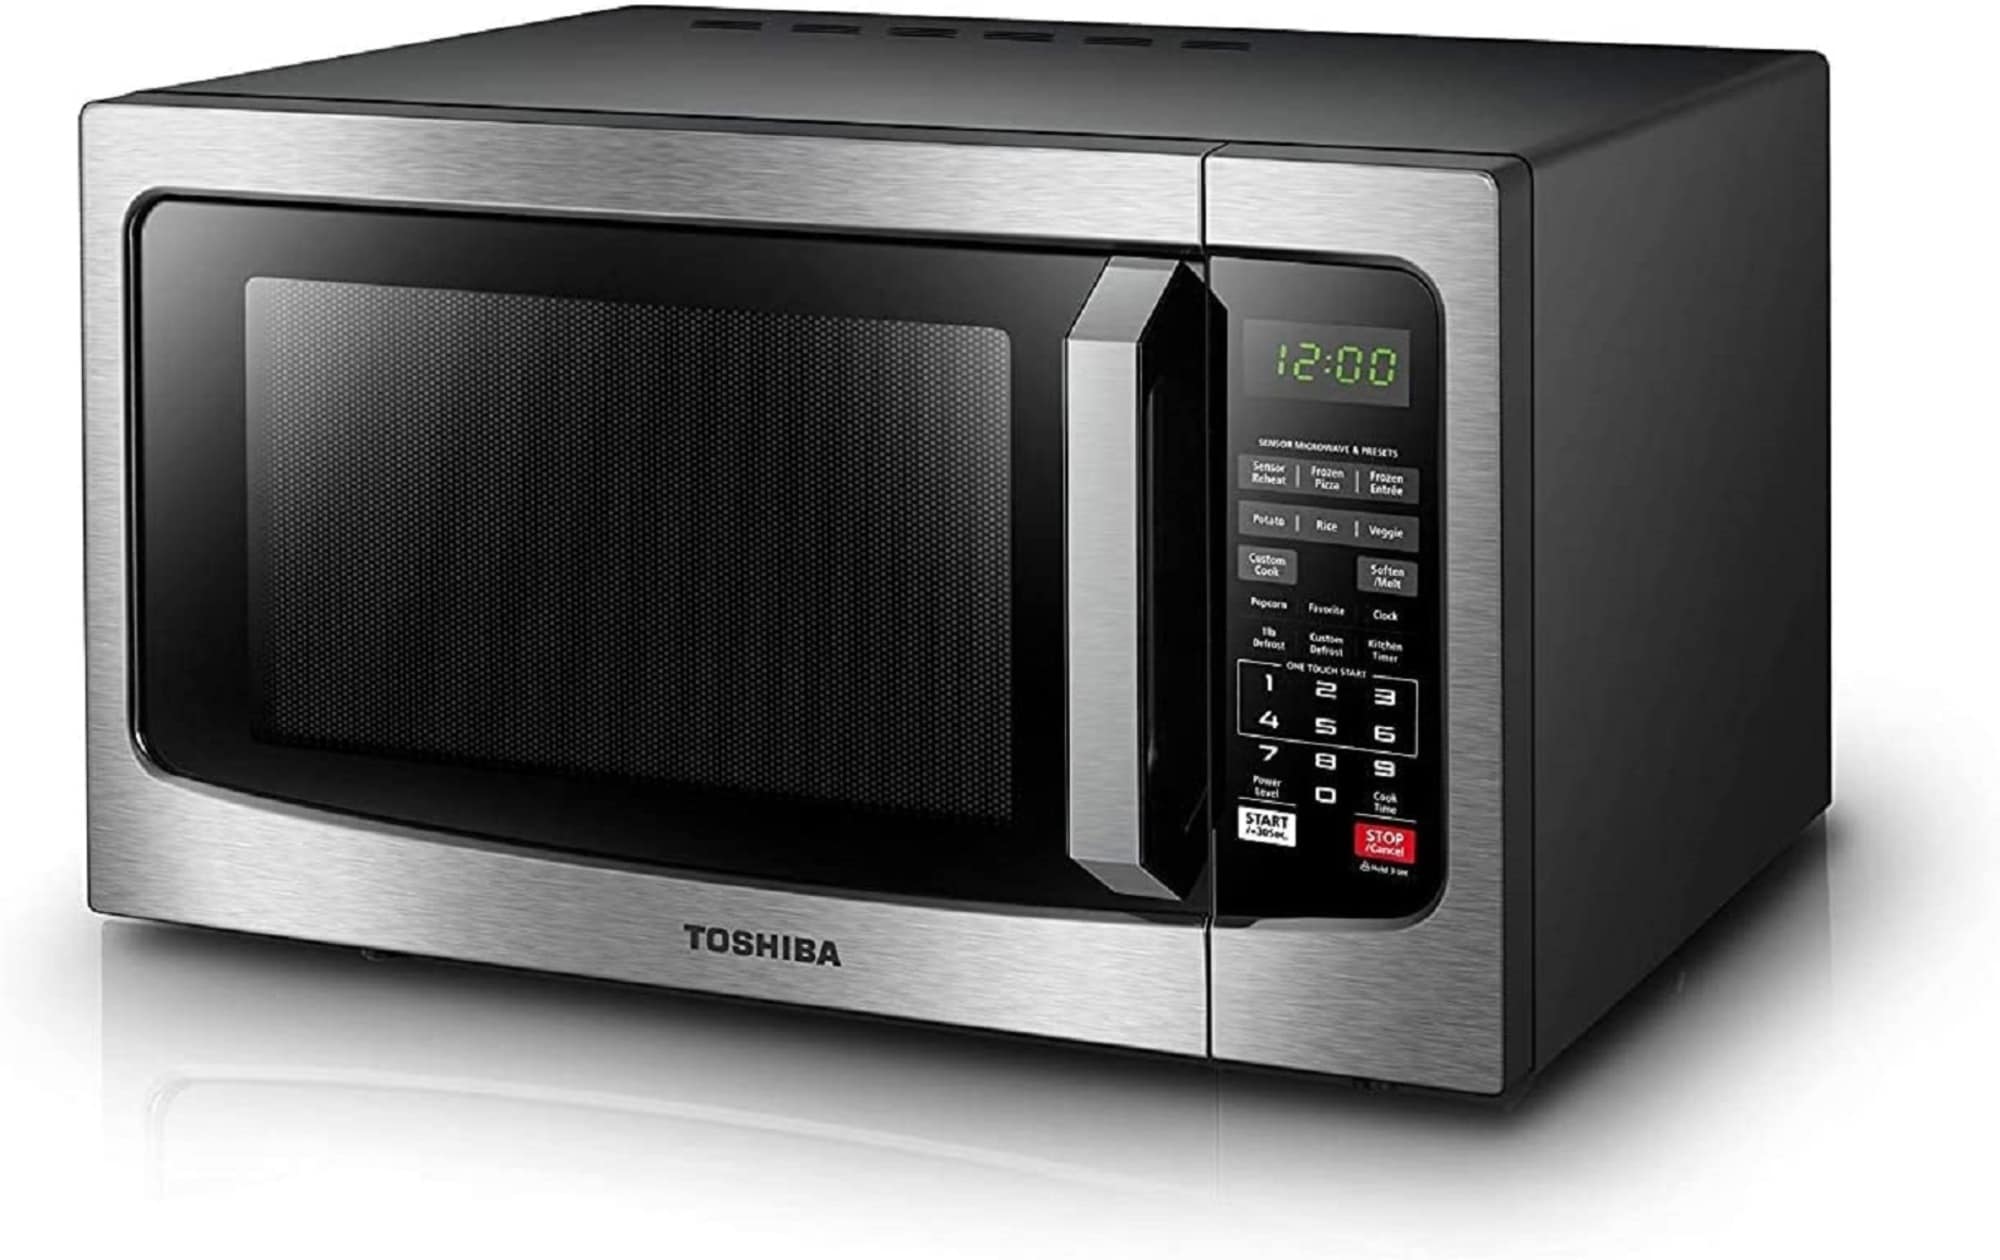 Toshiba Microwave Oven - appliances - by owner - sale - craigslist